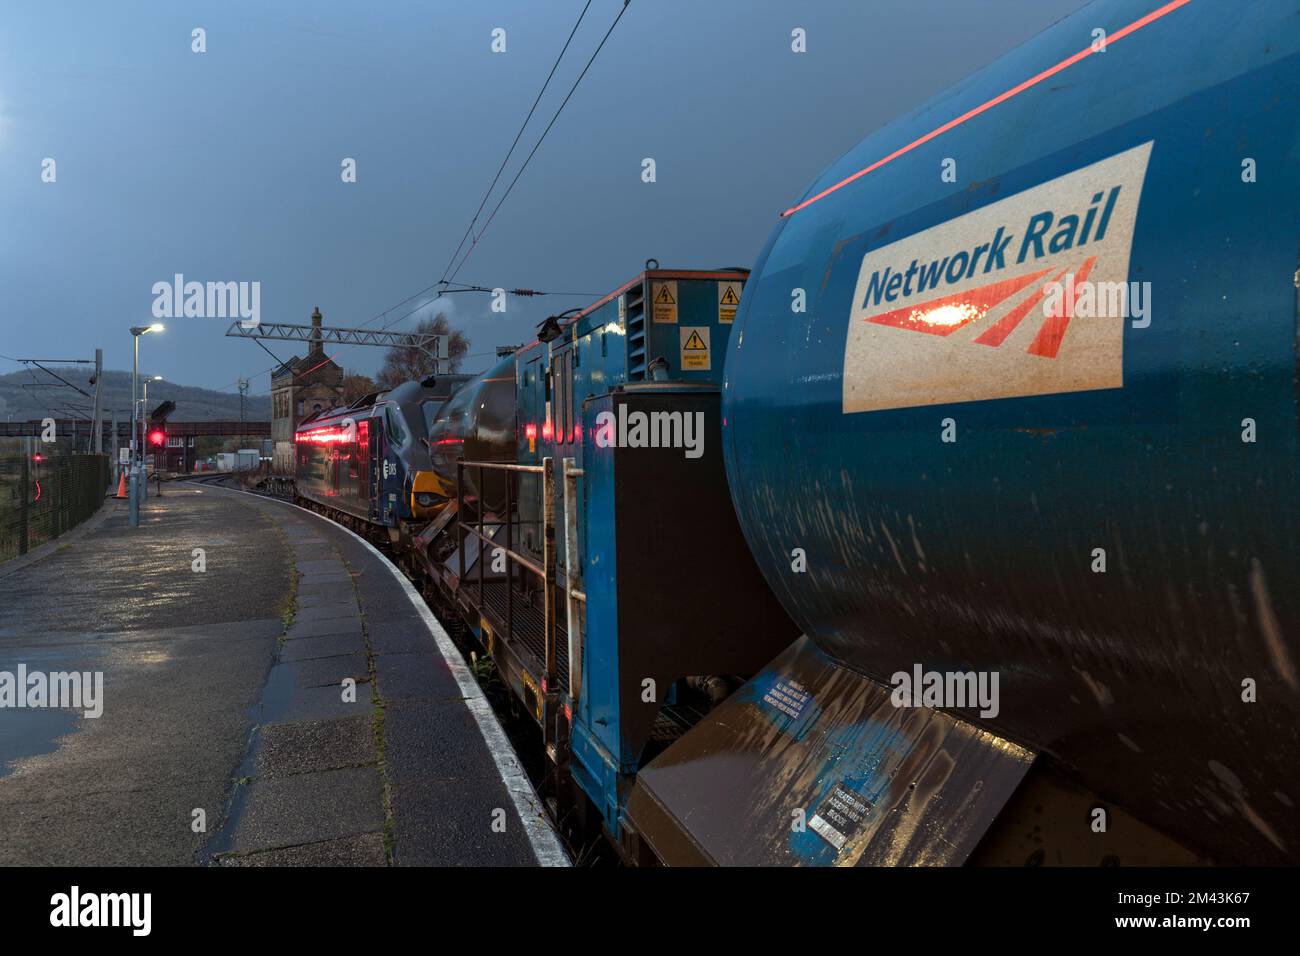 Network Rail railhead treatment train operated to deal with leaves on the line Stock Photo